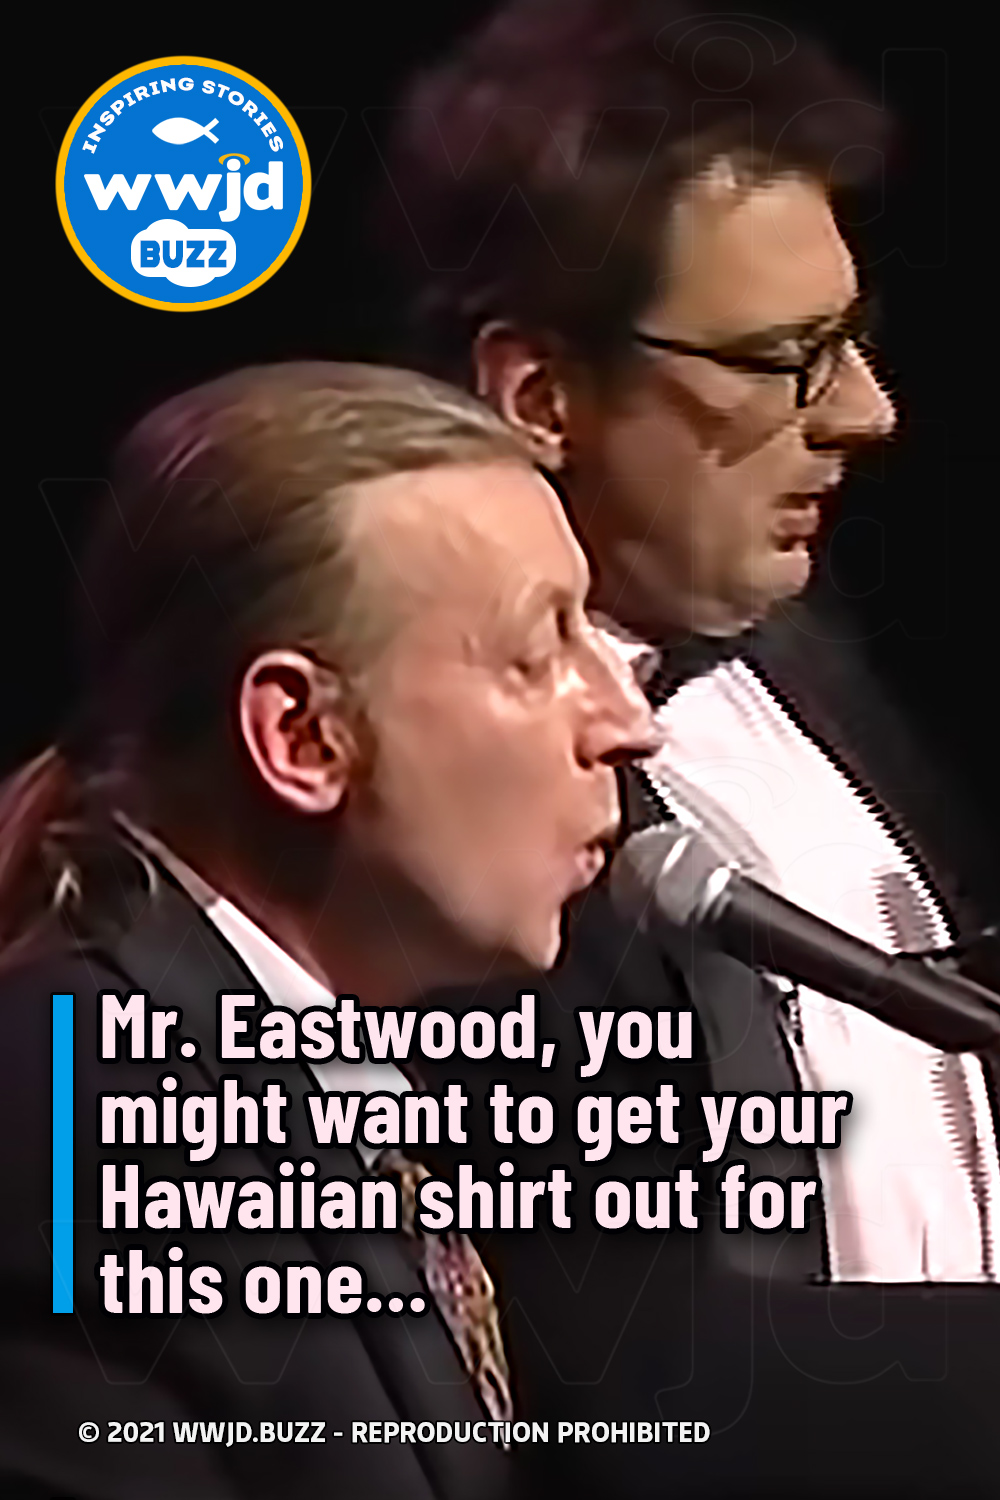 Mr. Eastwood, you might want to get your Hawaiian shirt out for this one...